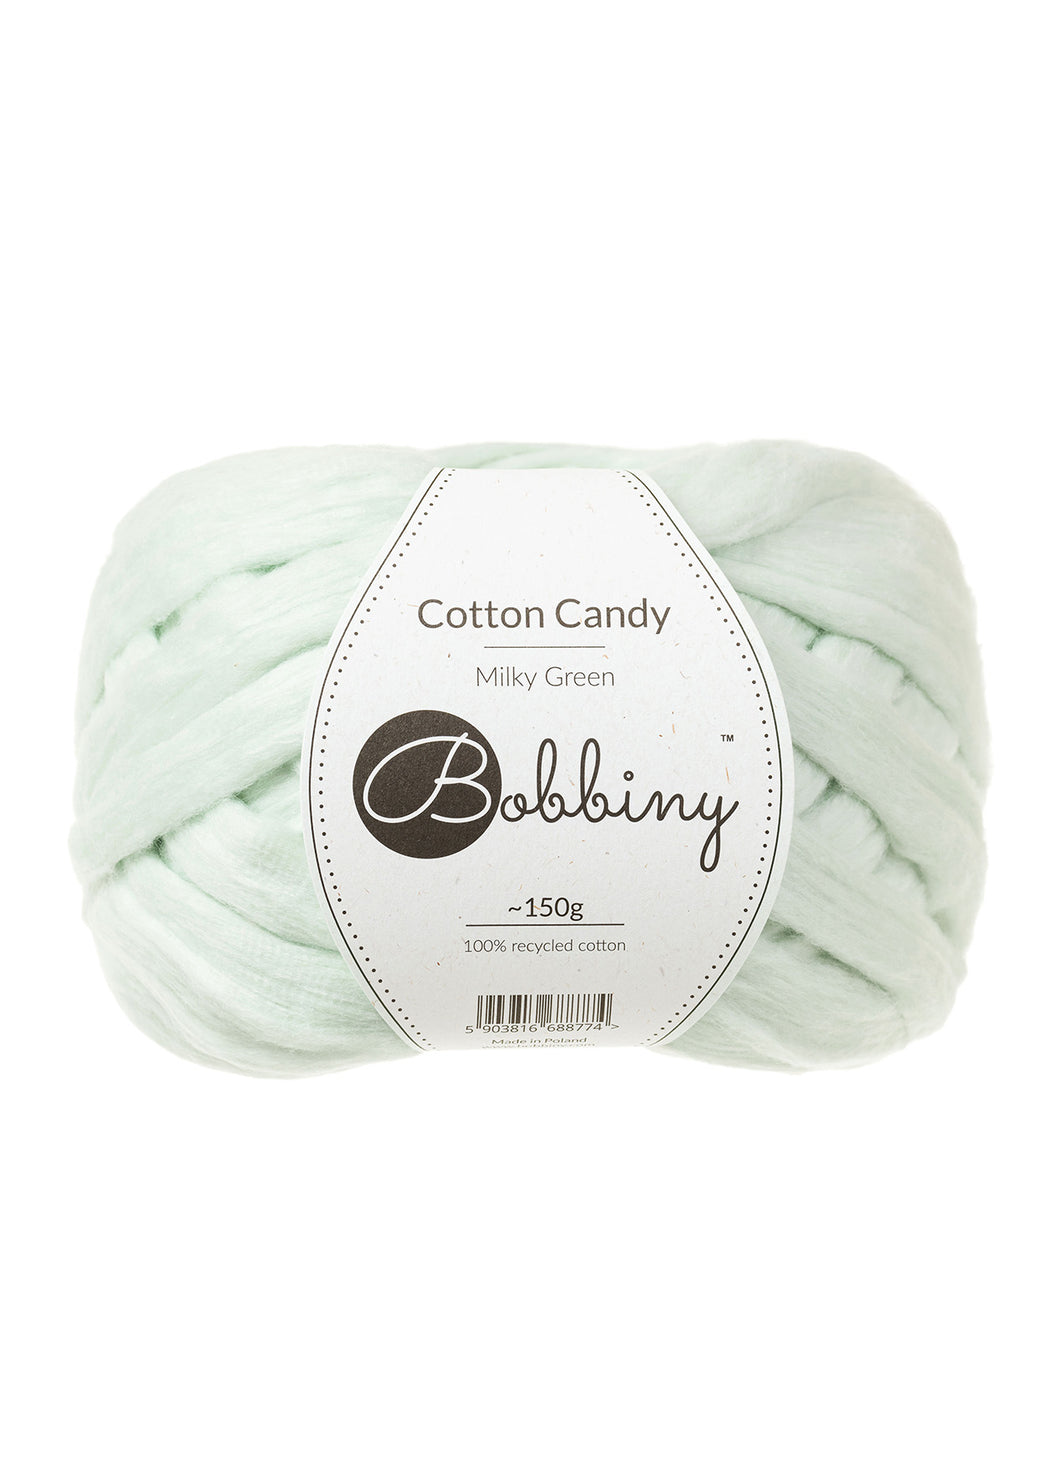 Cotton Candy Milky Green